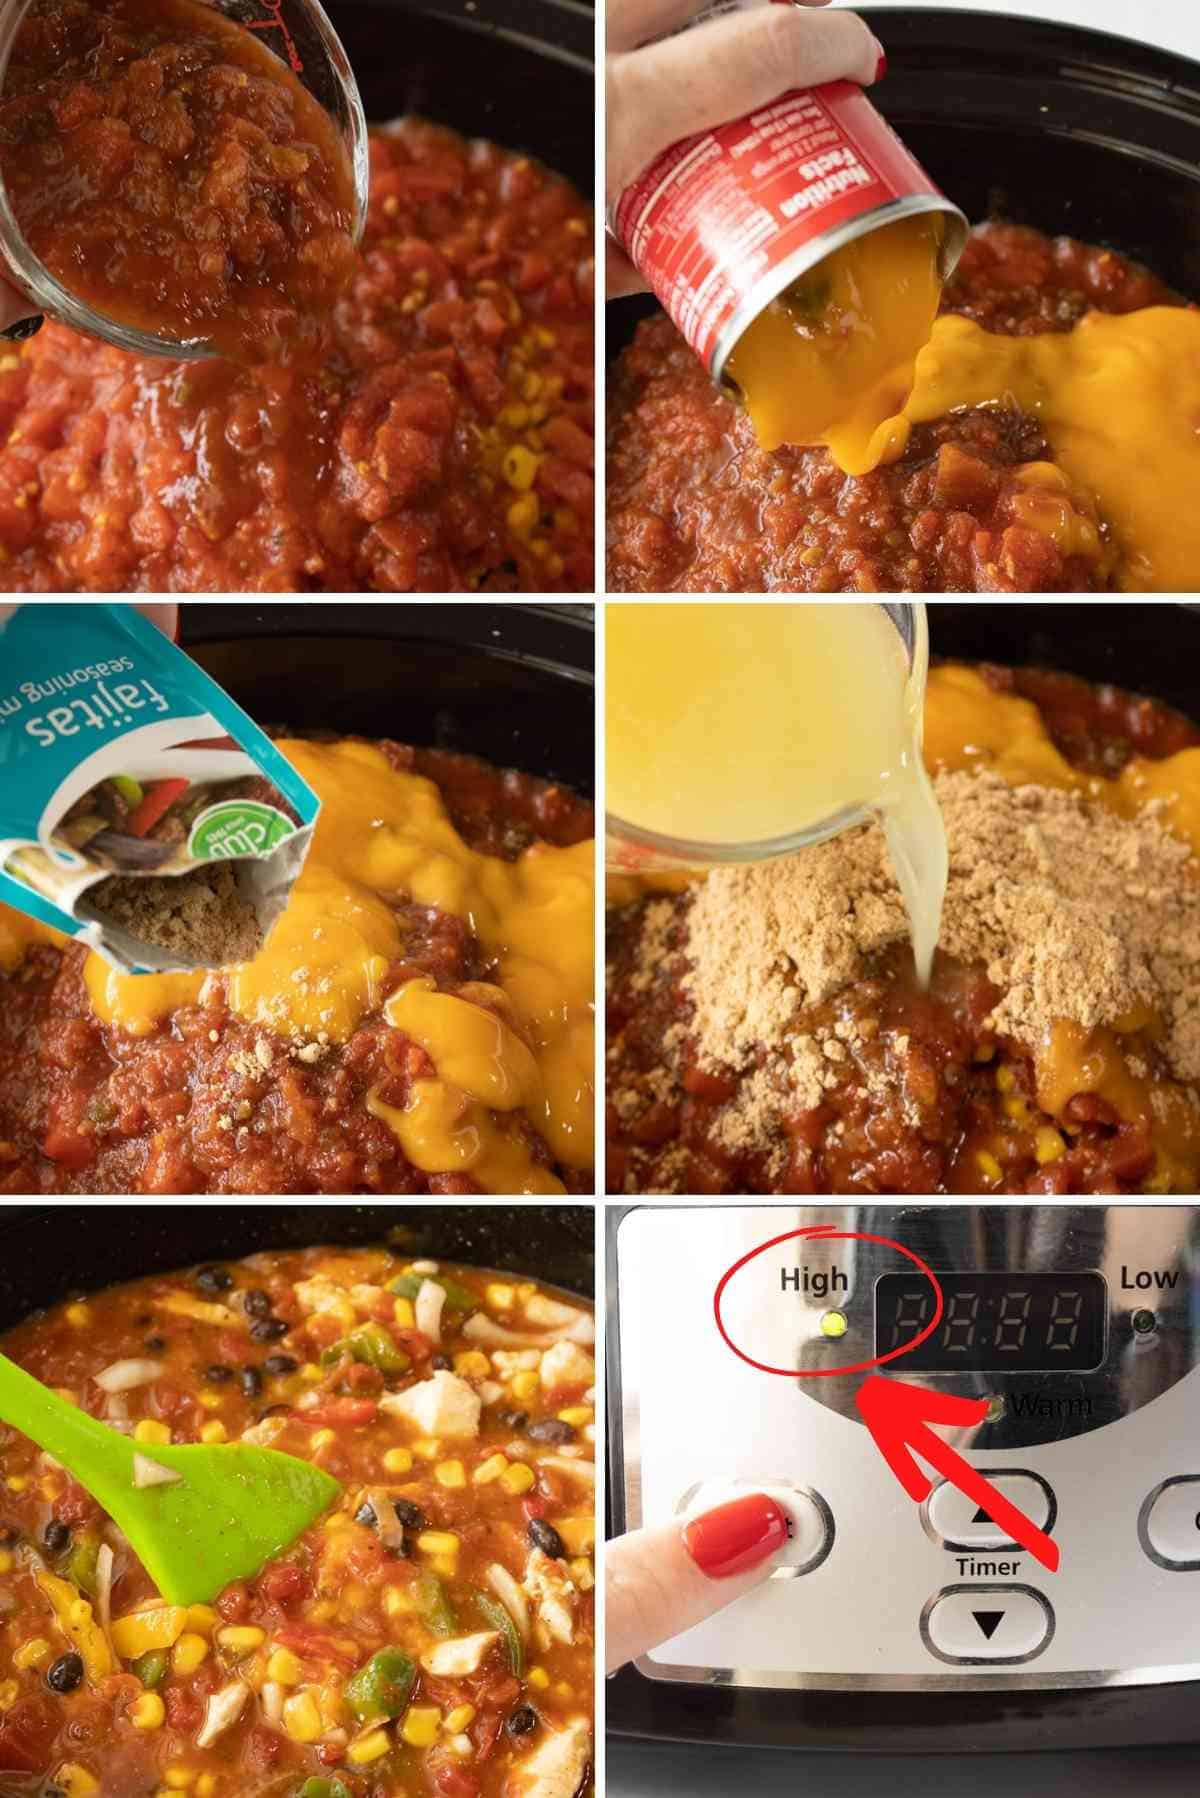 Dump in remaining ingredients and stir it up!